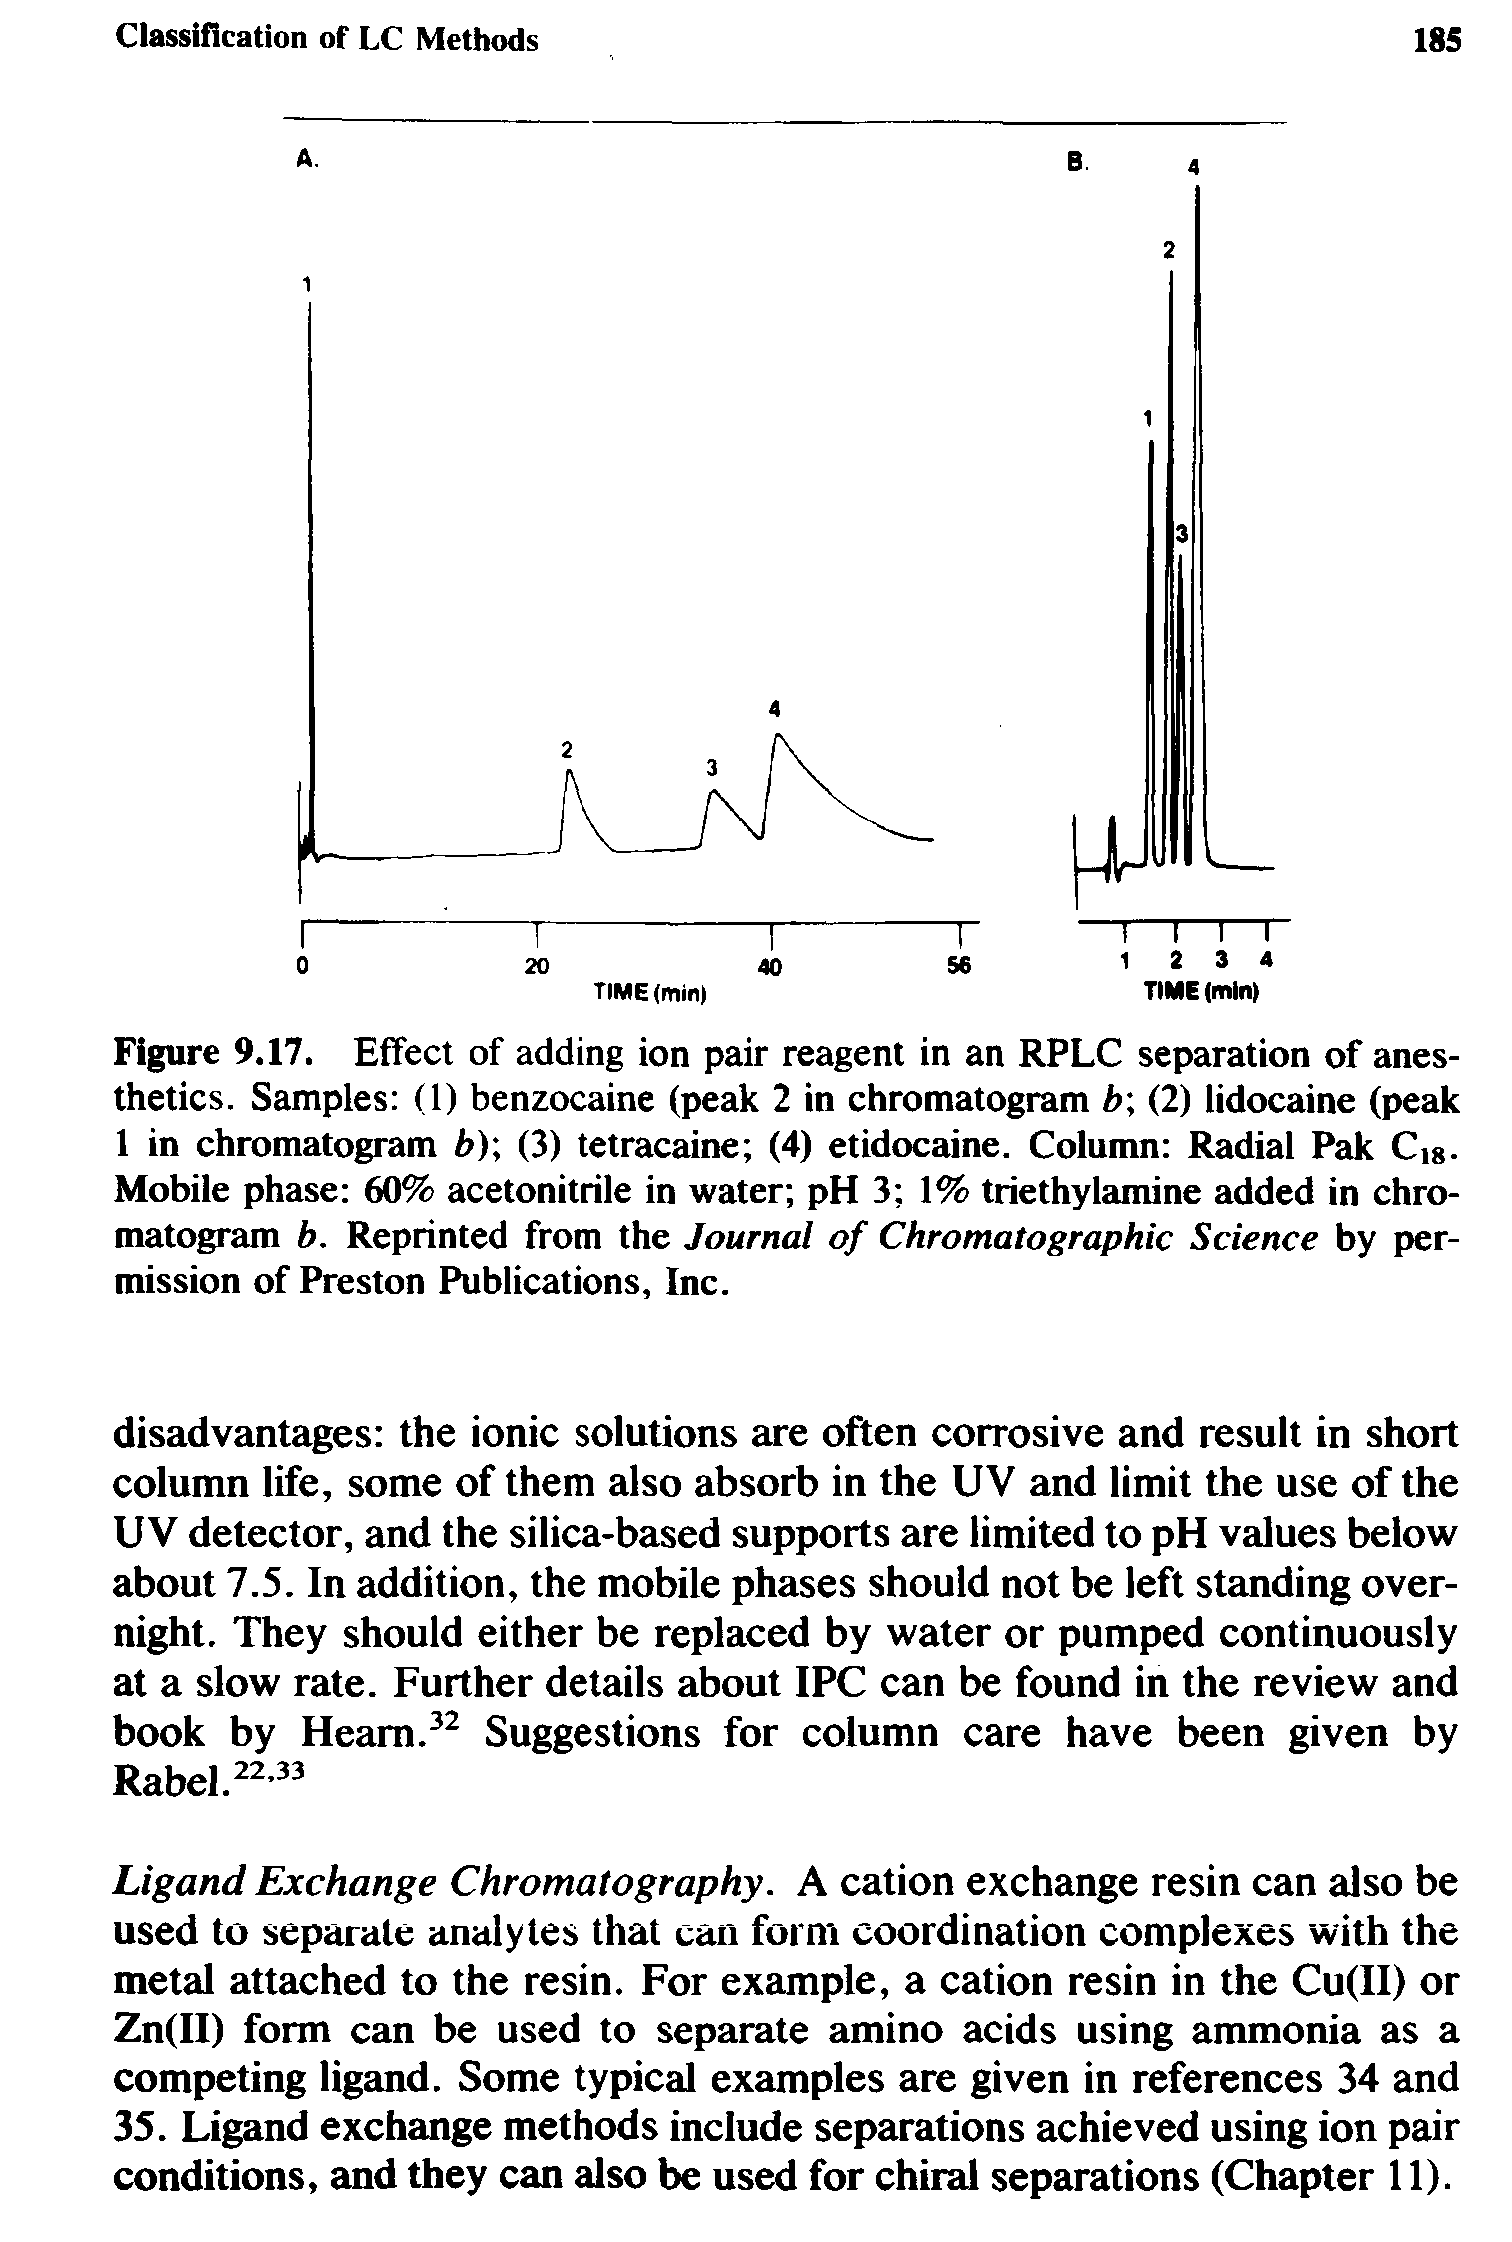 Figure 9.17. Effect of adding ion pair reagent in an RPLC separation of anesthetics. Samples (1) benzocaine (peak 2 in chromatogram b (2) lidocaine (peak 1 in chromatogram b) (3) tetracaine (4) etidocaine. Column Radial Pak Ci8. Mobile phase 60% acetonitrile in water pH 3 1% triethylamine added in chromatogram b. Reprinted from the Journal of Chromatographic Science by permission of Preston Publications, Inc.